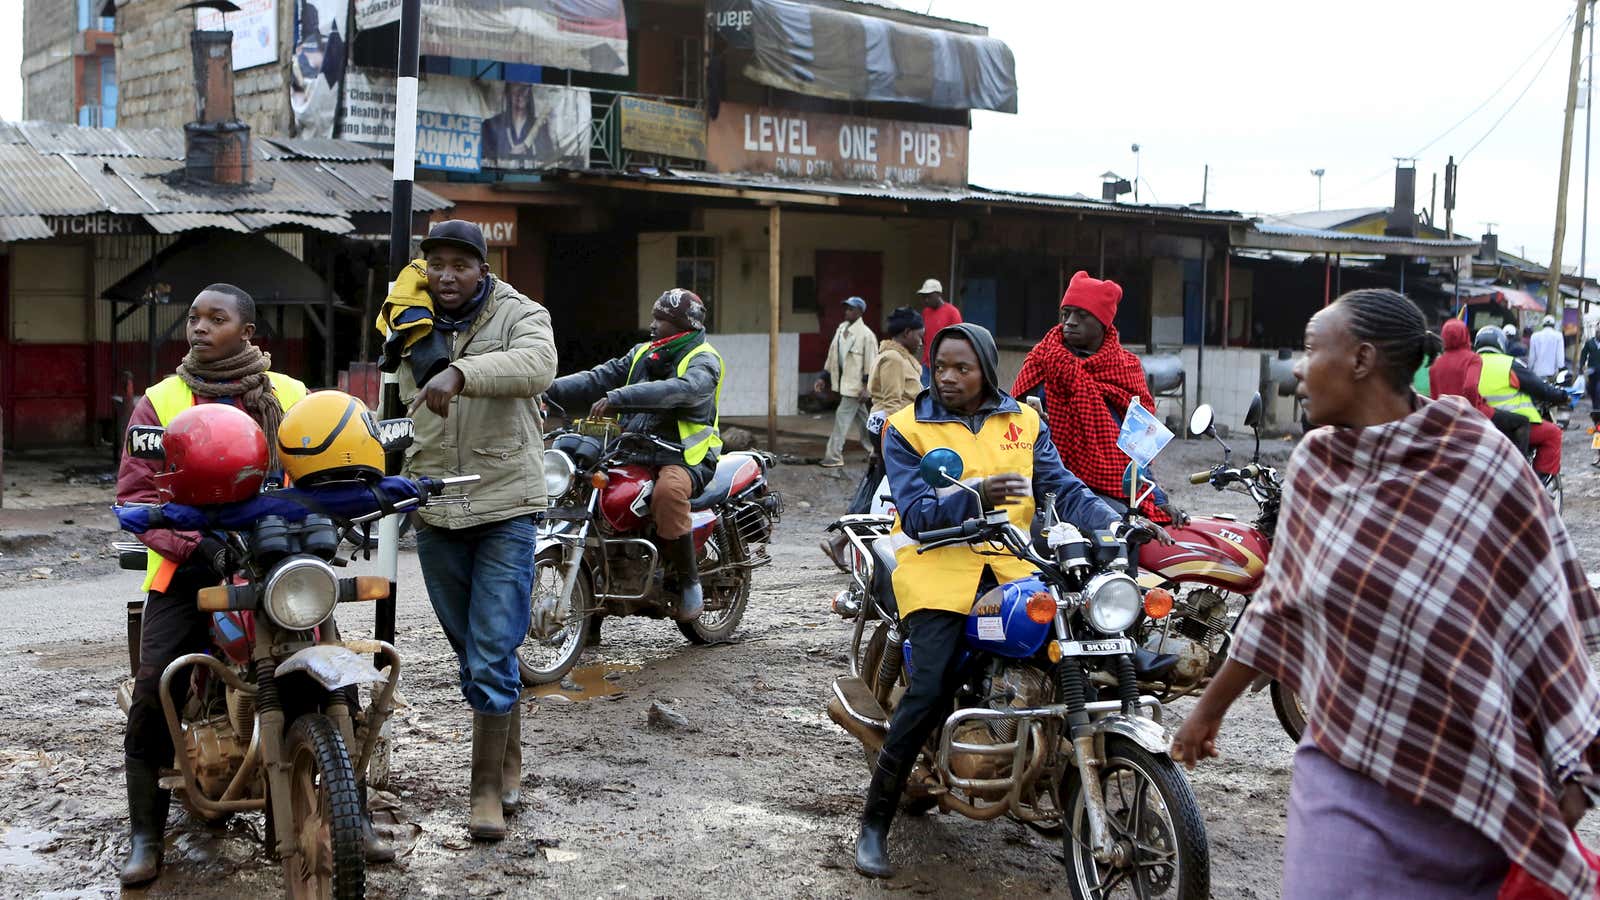 Electric motorbikes could be only a couple hundred dollars more expensive than conventional motorcycles, which are ubiquitous in Africa.